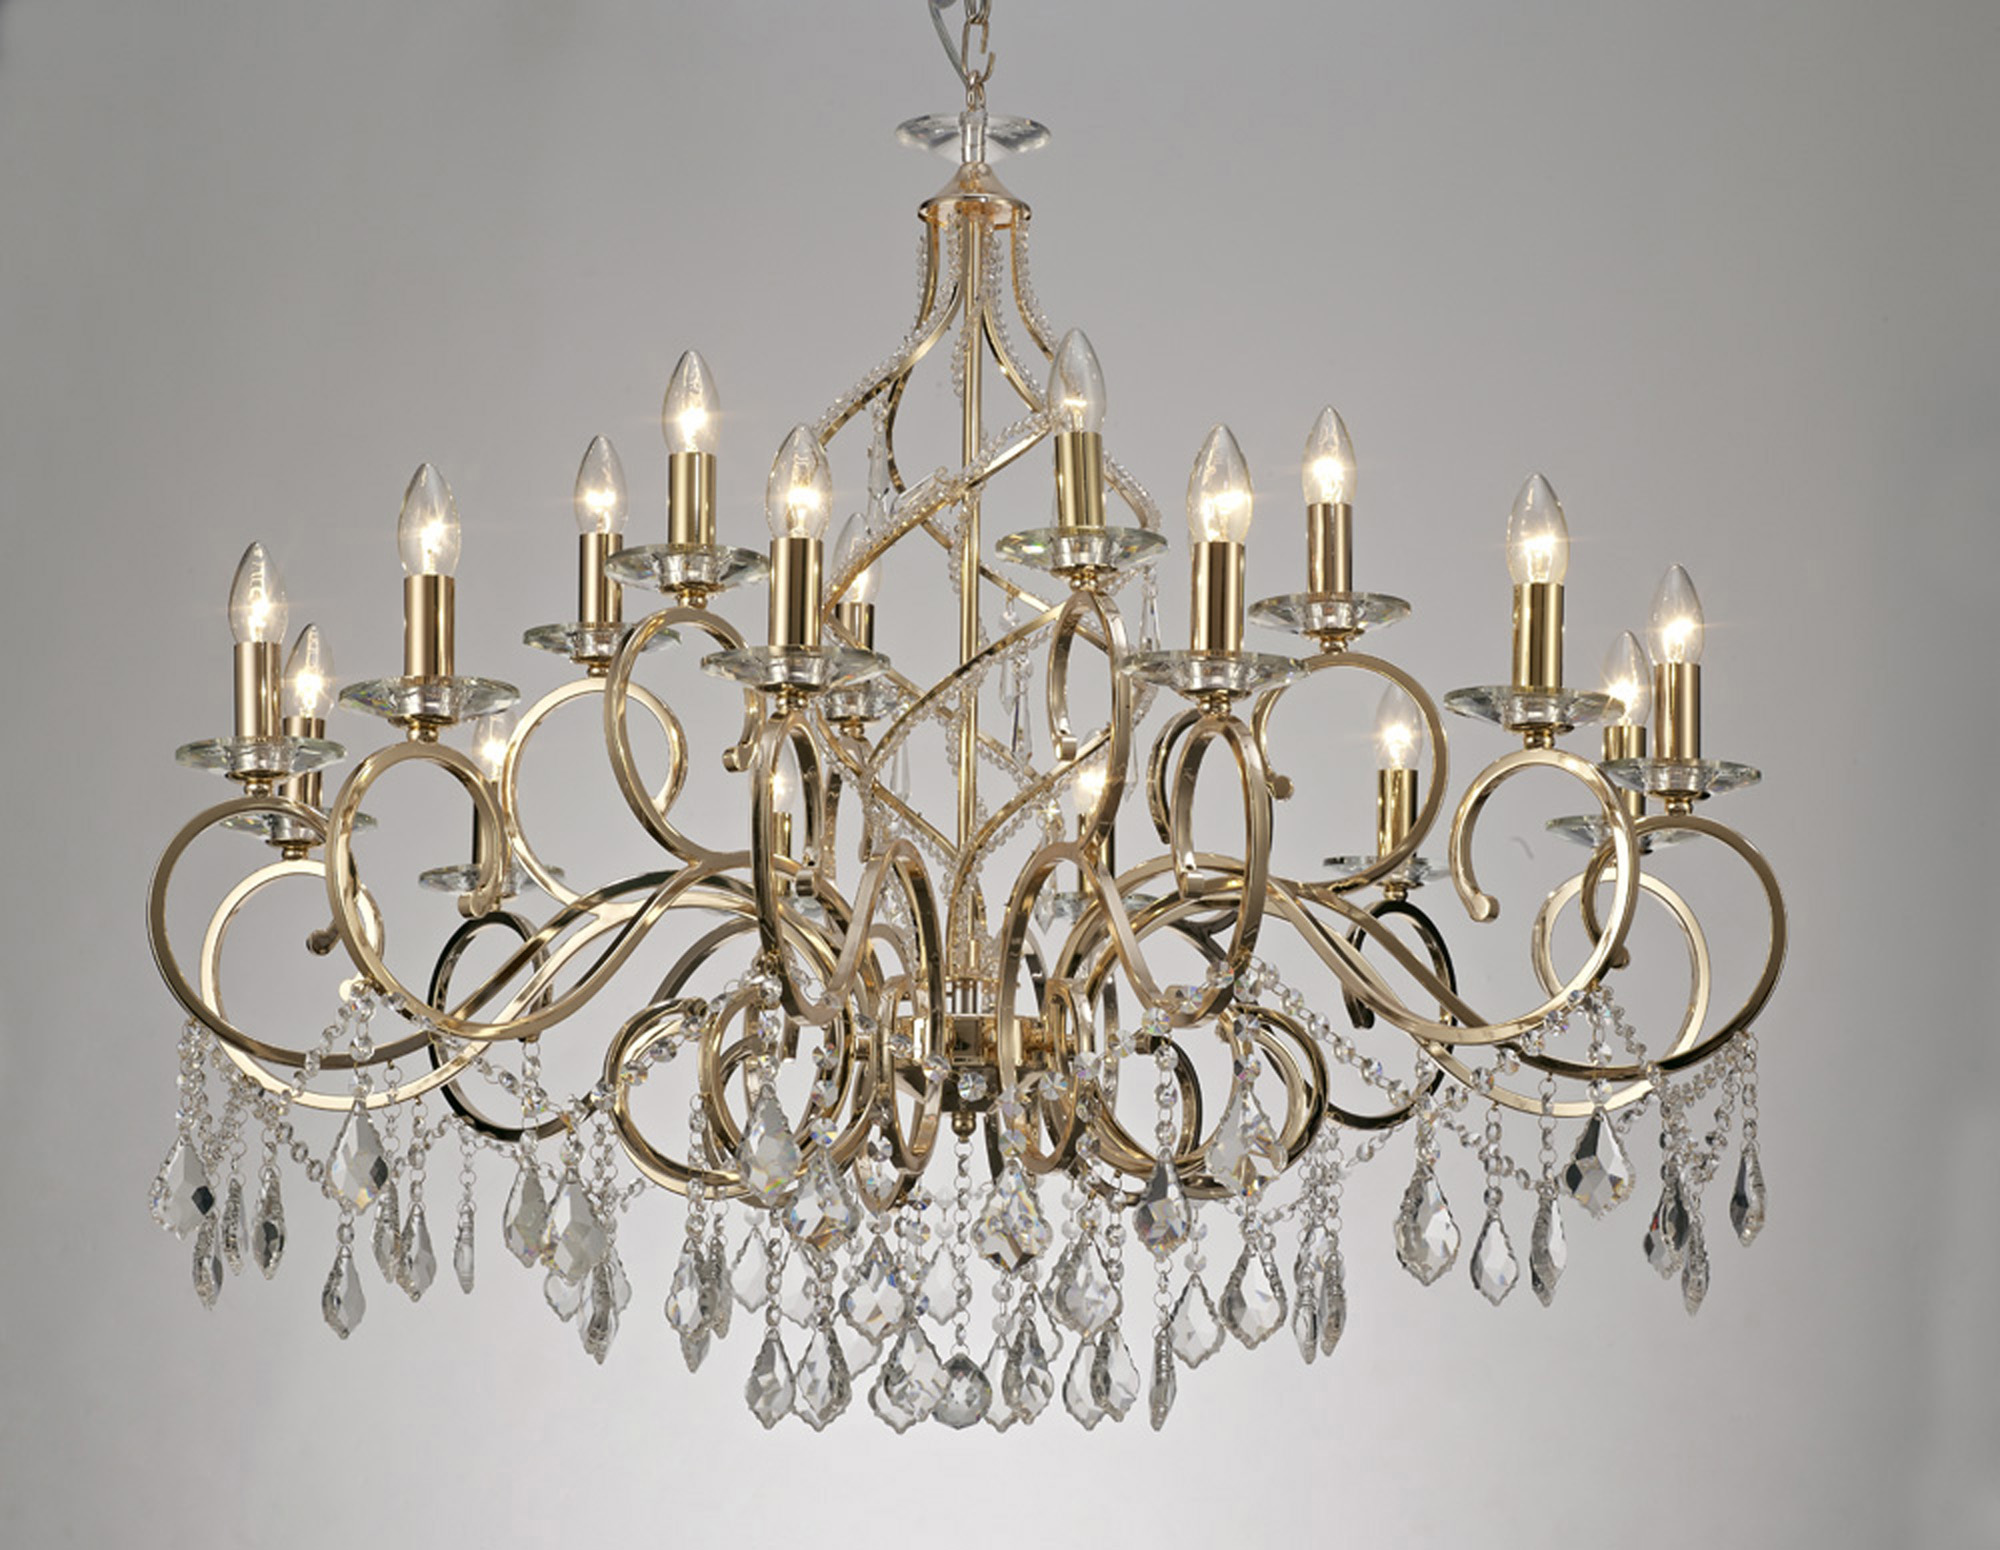 Torino French Gold Crystal Ceiling Lights Diyas Tiered Crystal Fittings